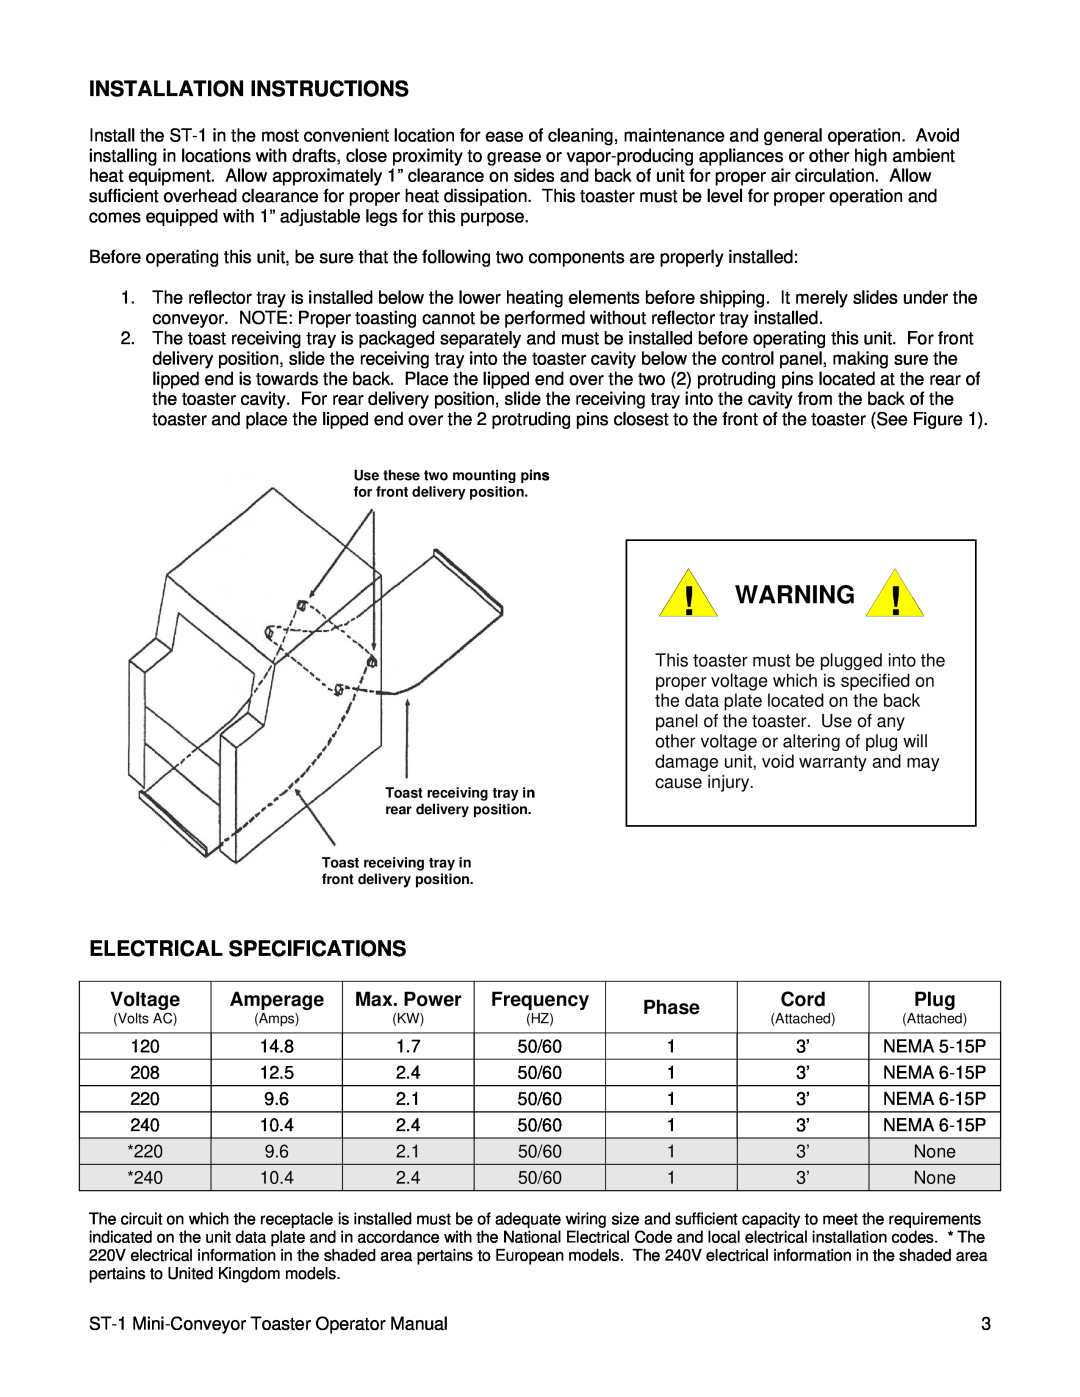 Lincoln ST-1 Installation Instructions, Electrical Specifications, Voltage, Amperage, Max. Power, Frequency, Phase, Cord 